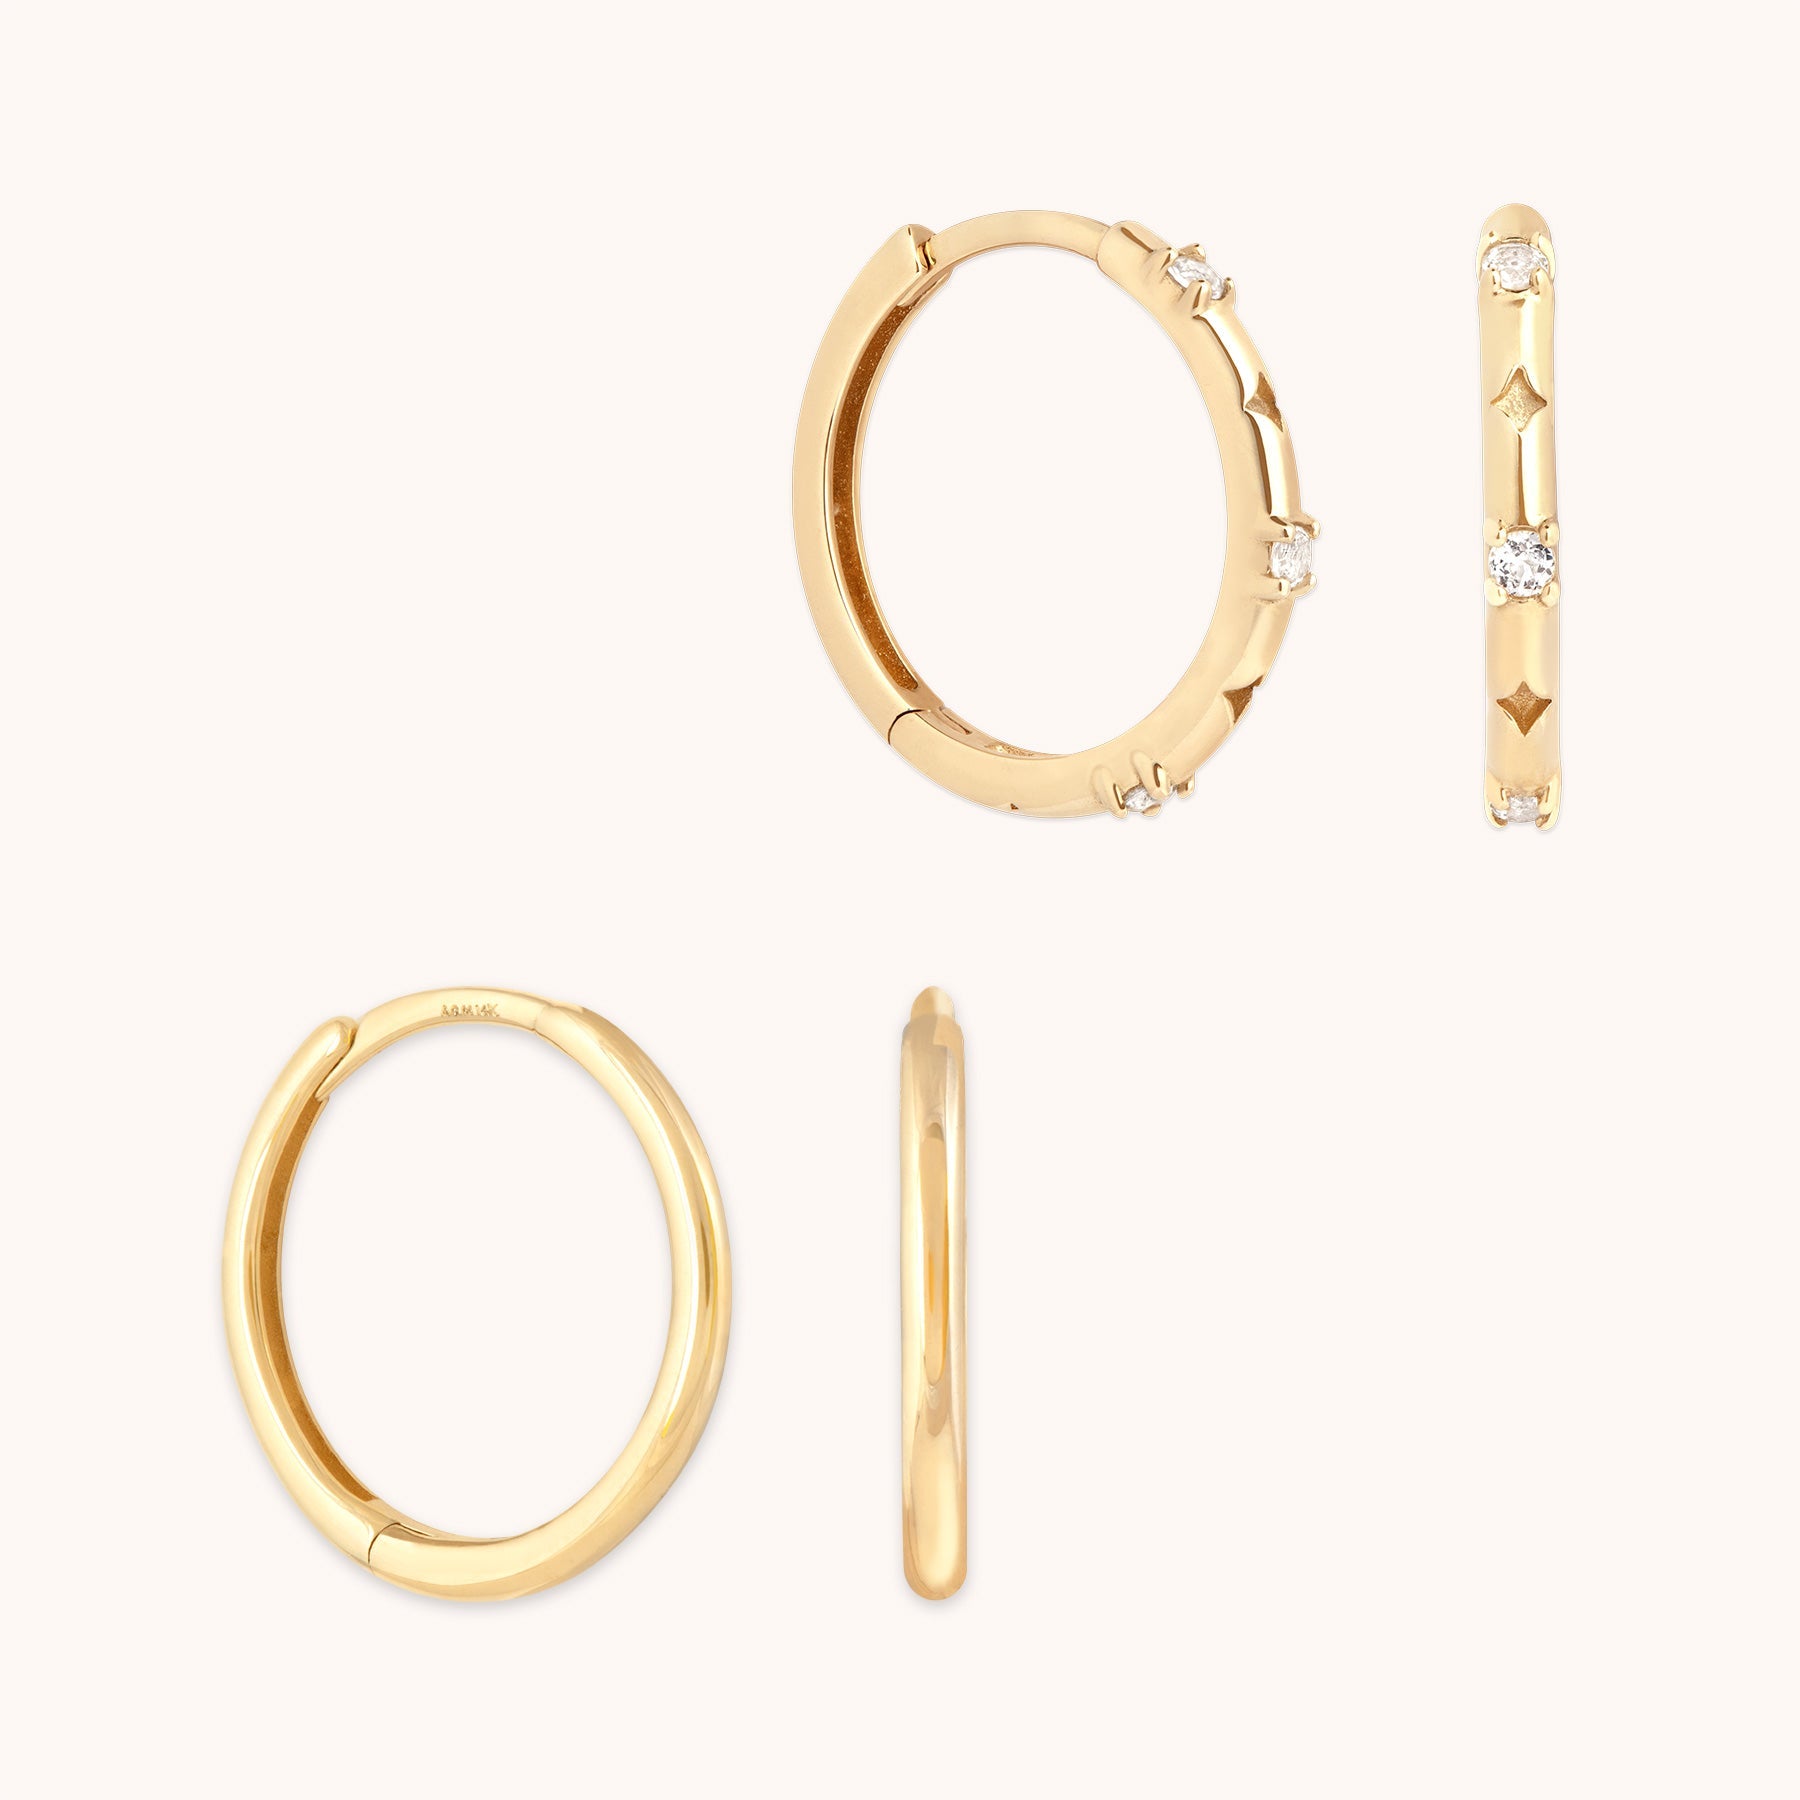 Cosmic Solid Gold Earring Gift Set | Astrid & Miyu Gifts